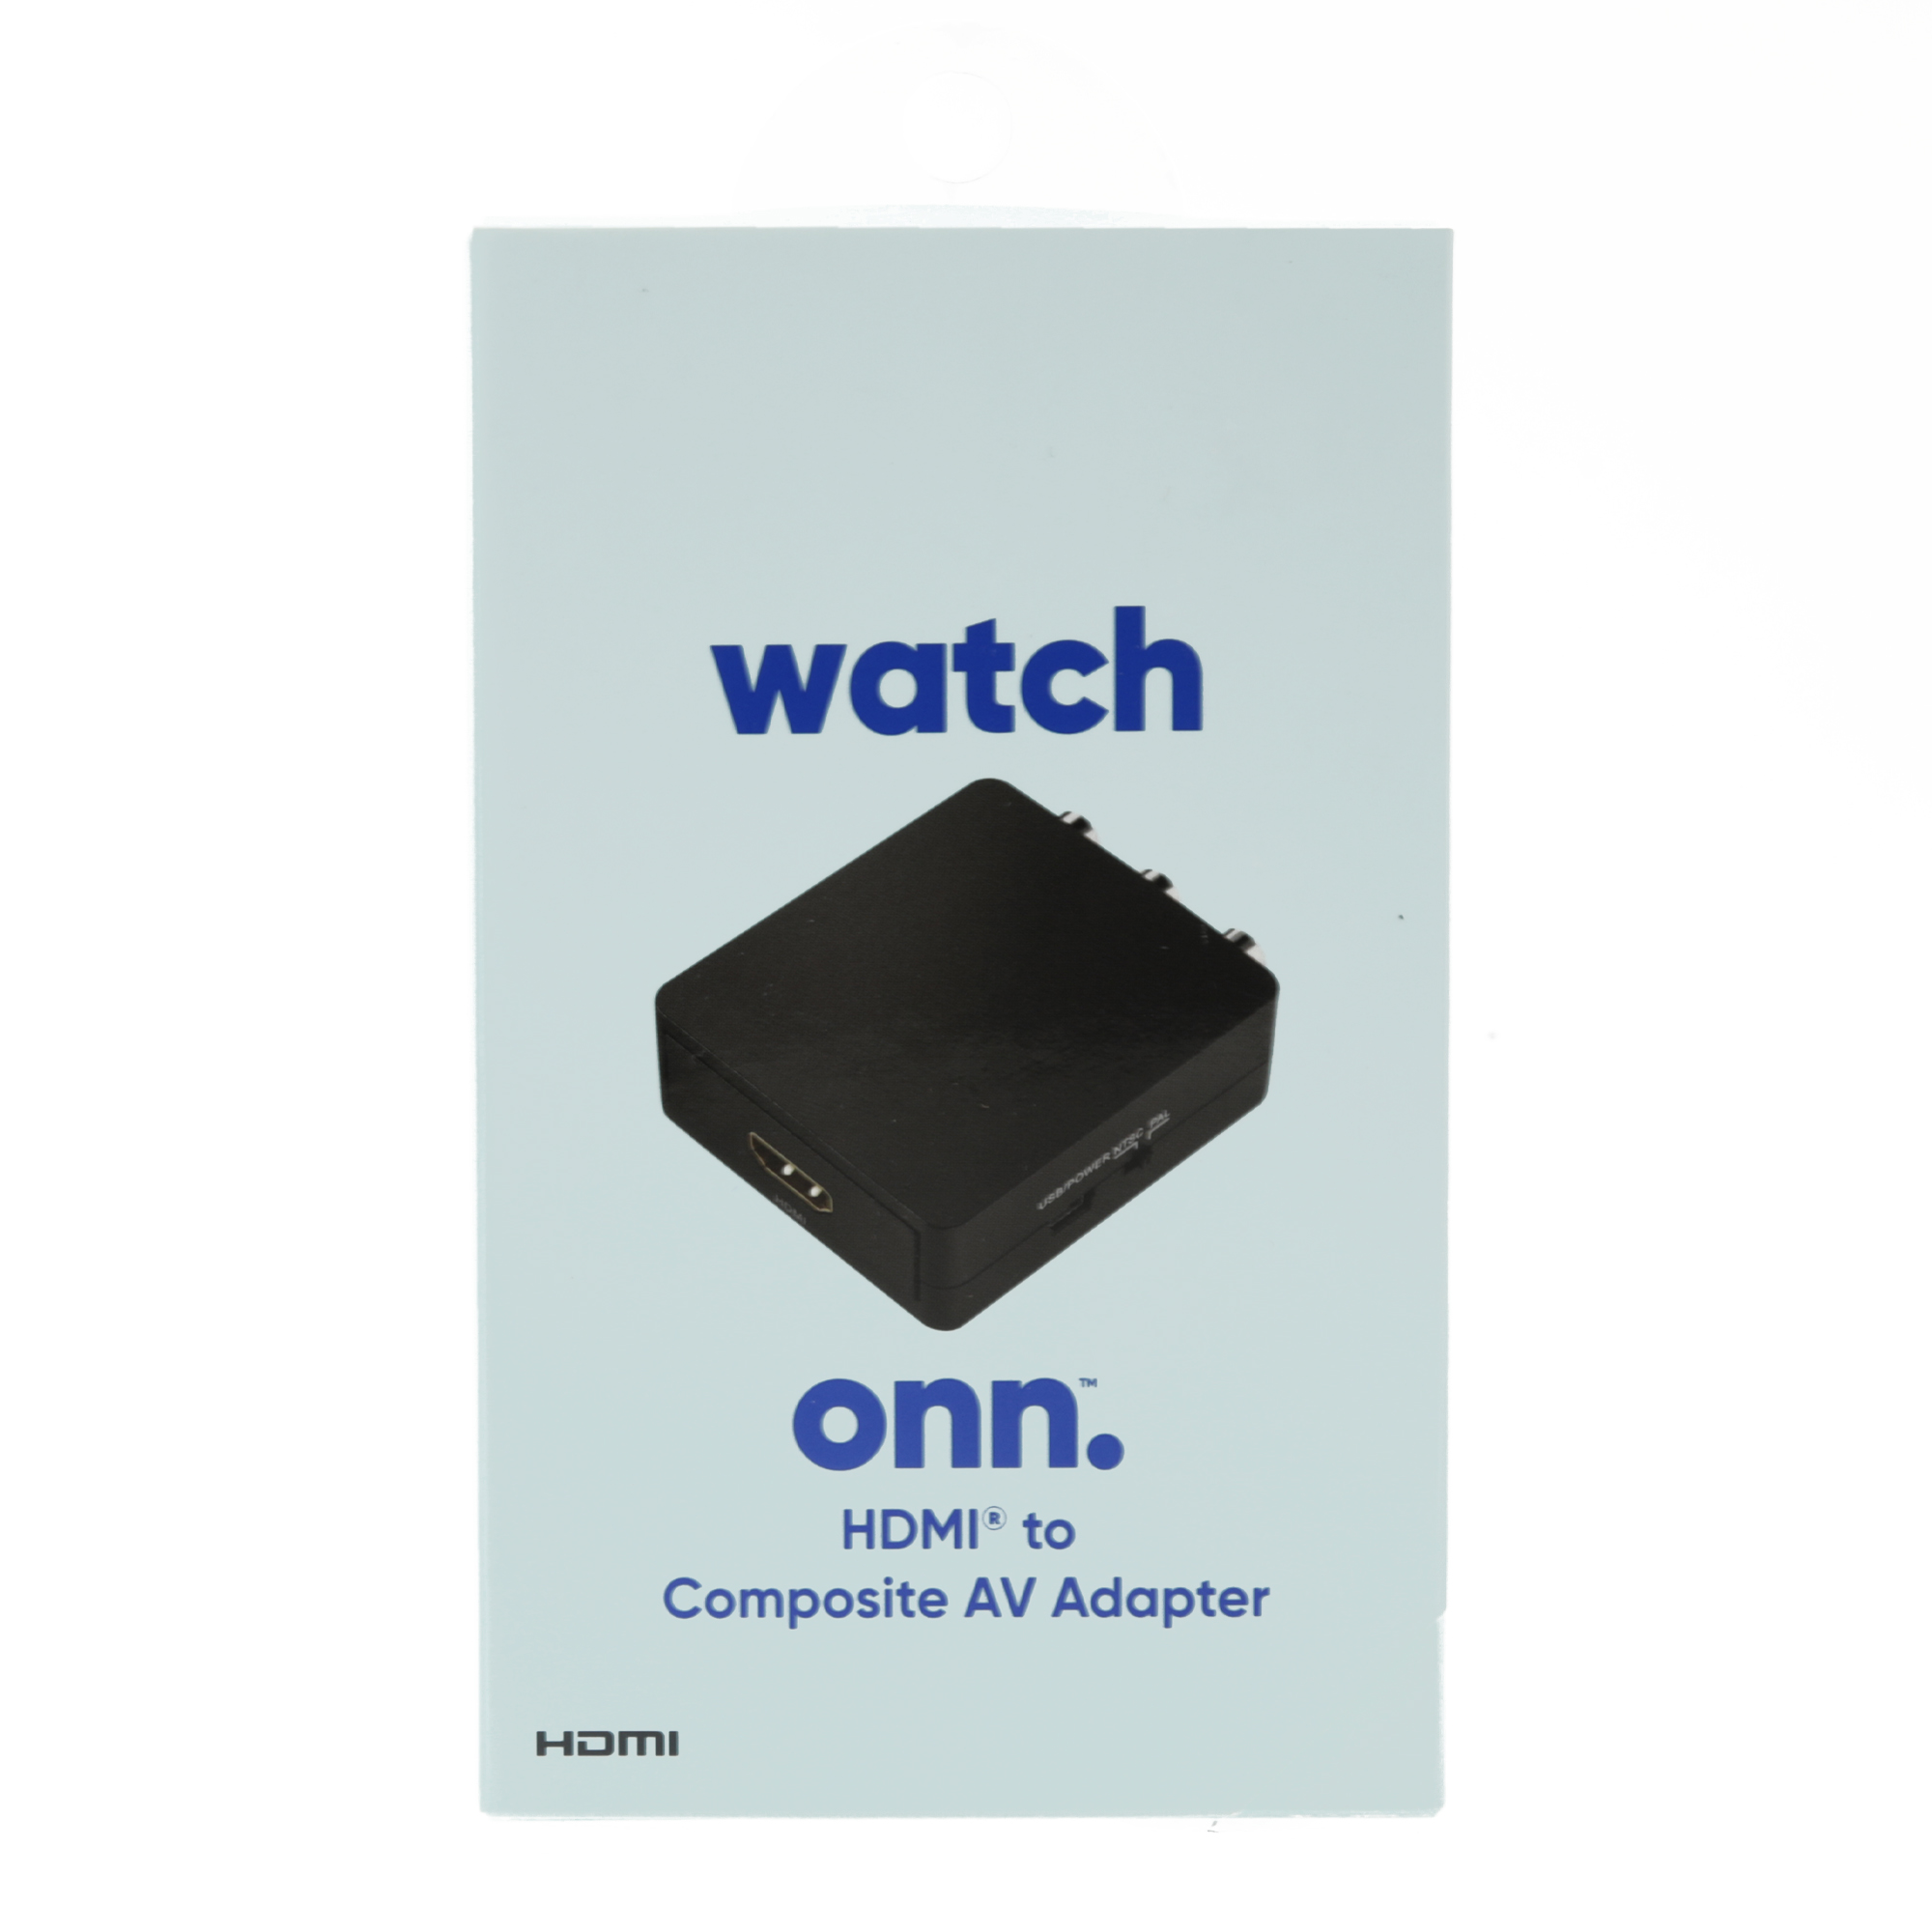 onn. HDMI to Composite AV Adapter, 2.6' Mini-USB Cable, 4.1" USB Wall Adapter, Black, 100008628 - image 1 of 7